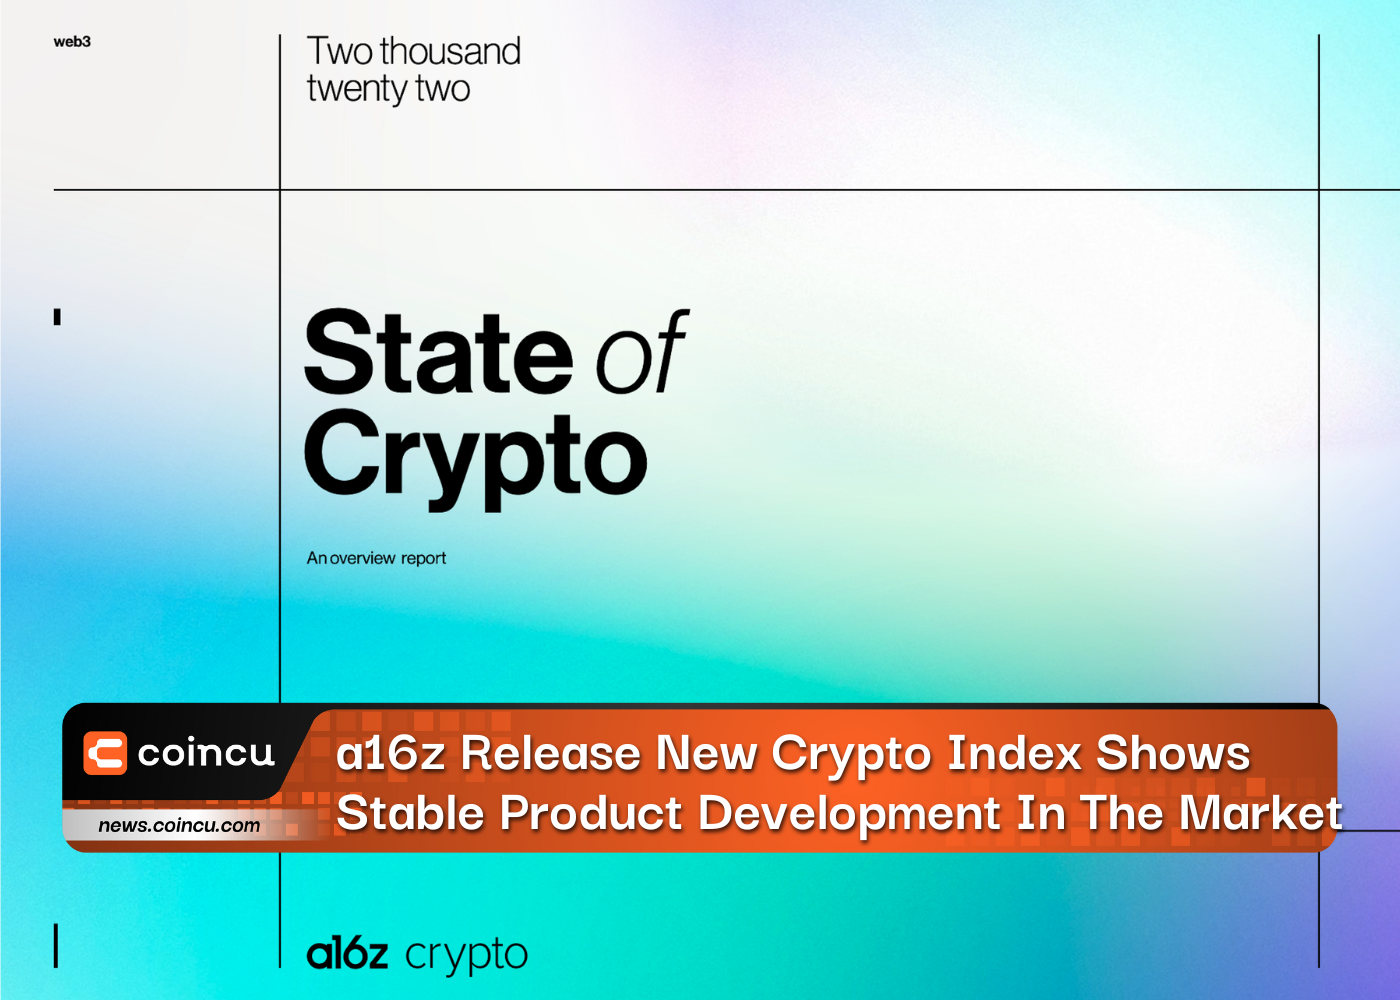 a16z Release New Crypto Index Shows Stable Product Development In The Market